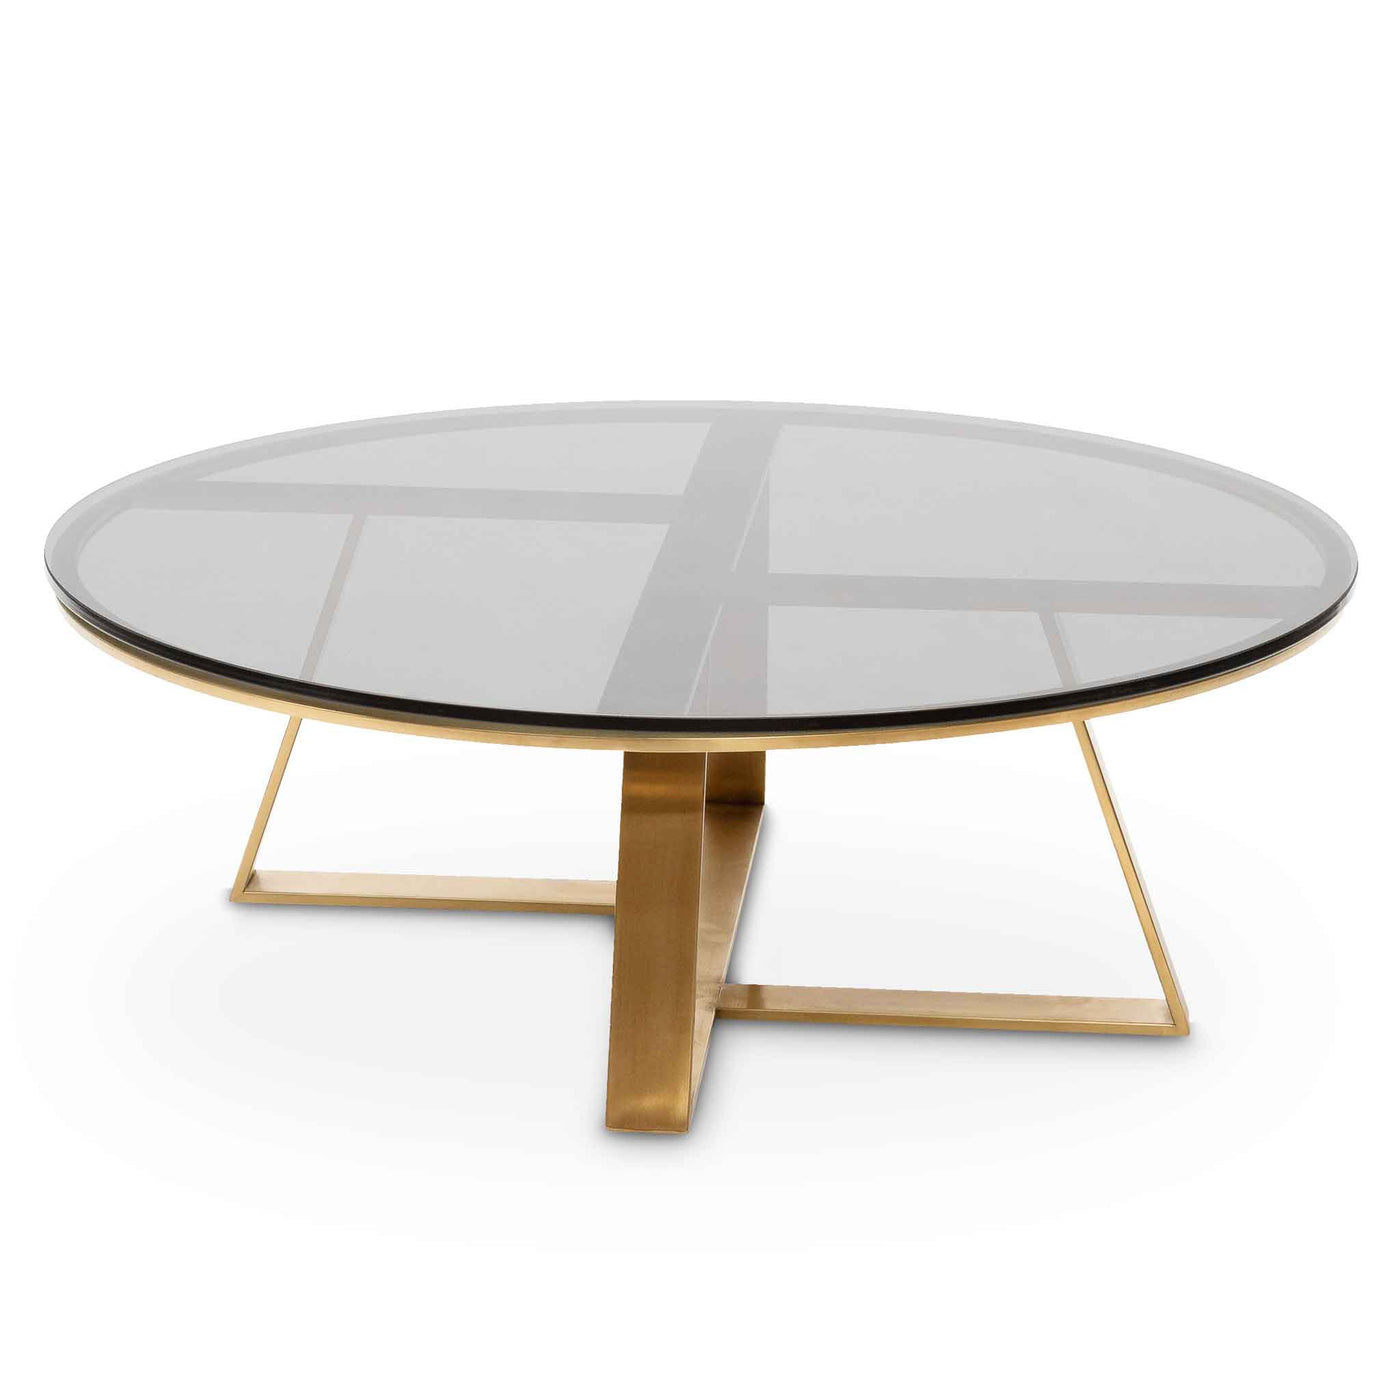 100cm Round Grey Glass Coffee Table - Gold Base